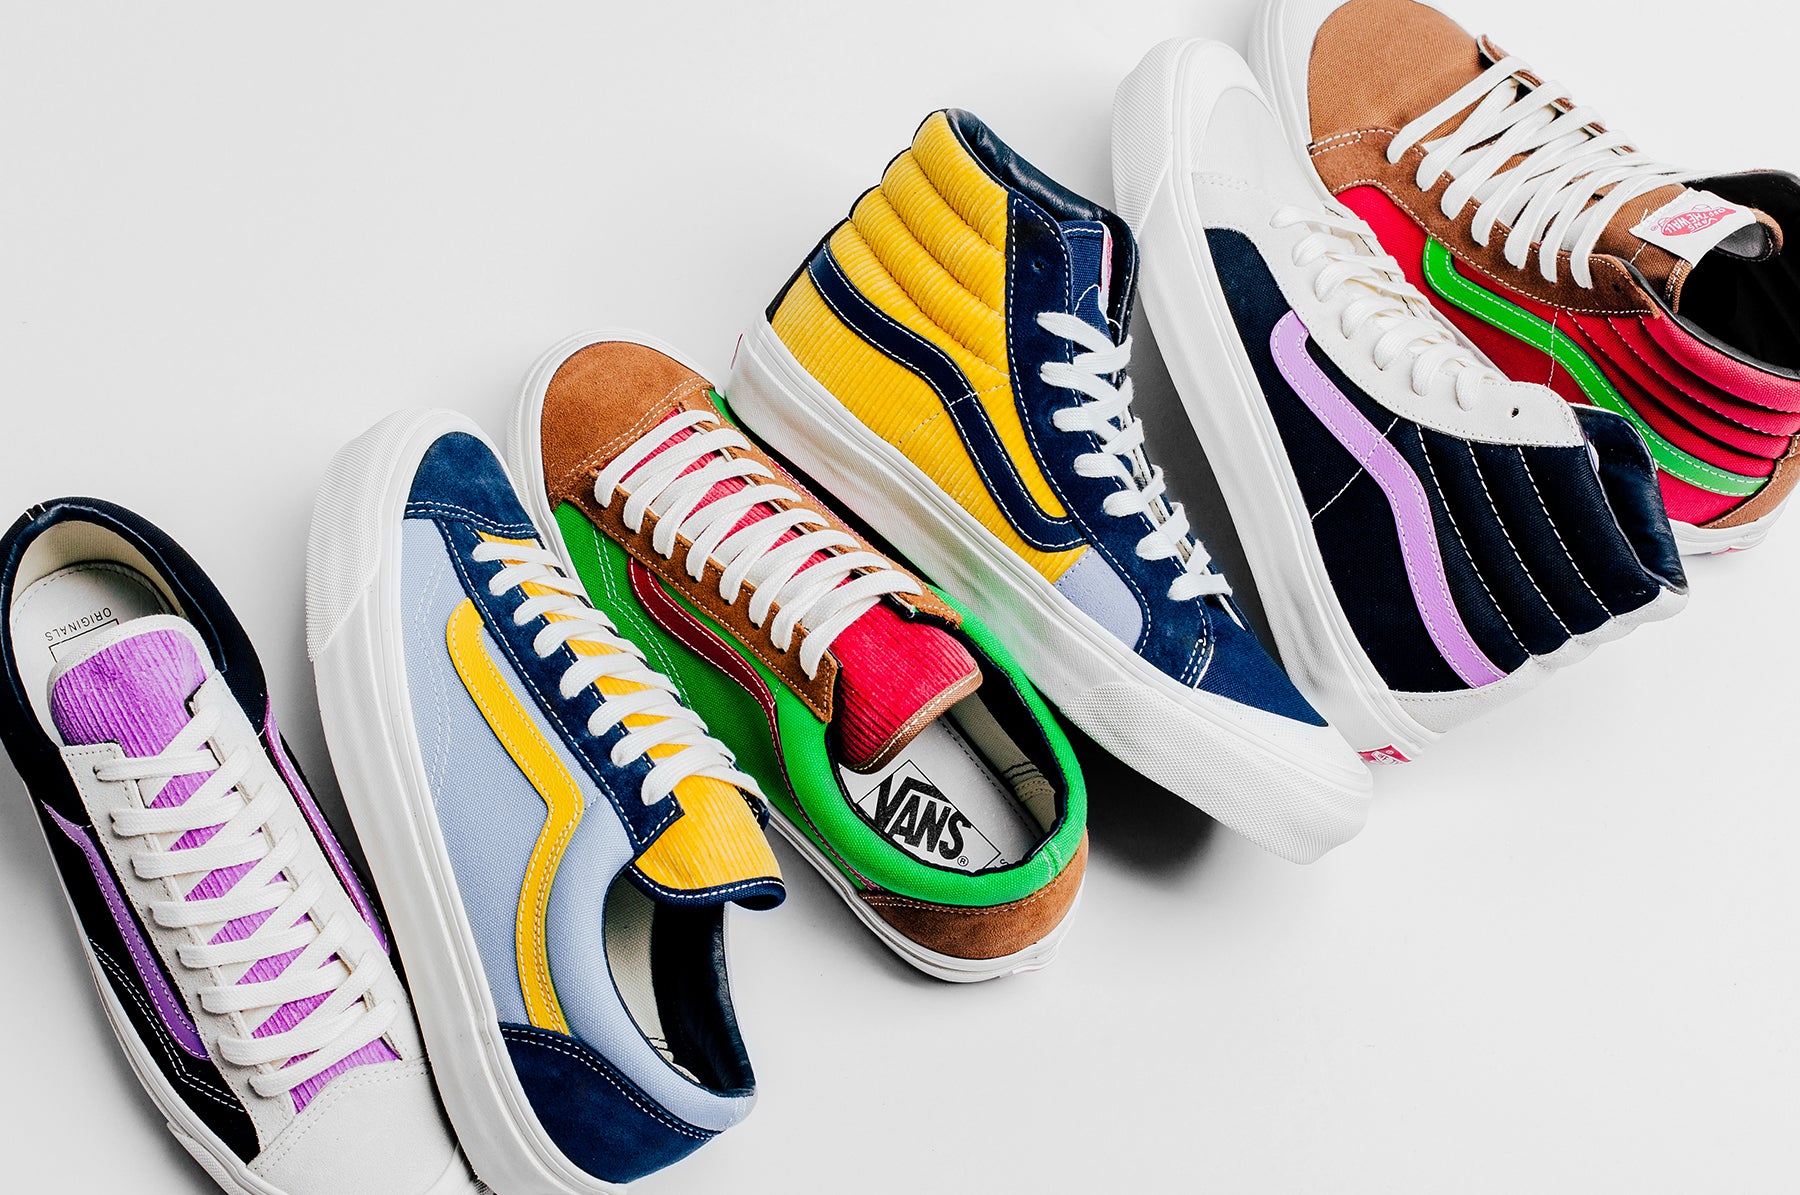 New Releases from Vans Vault Available 